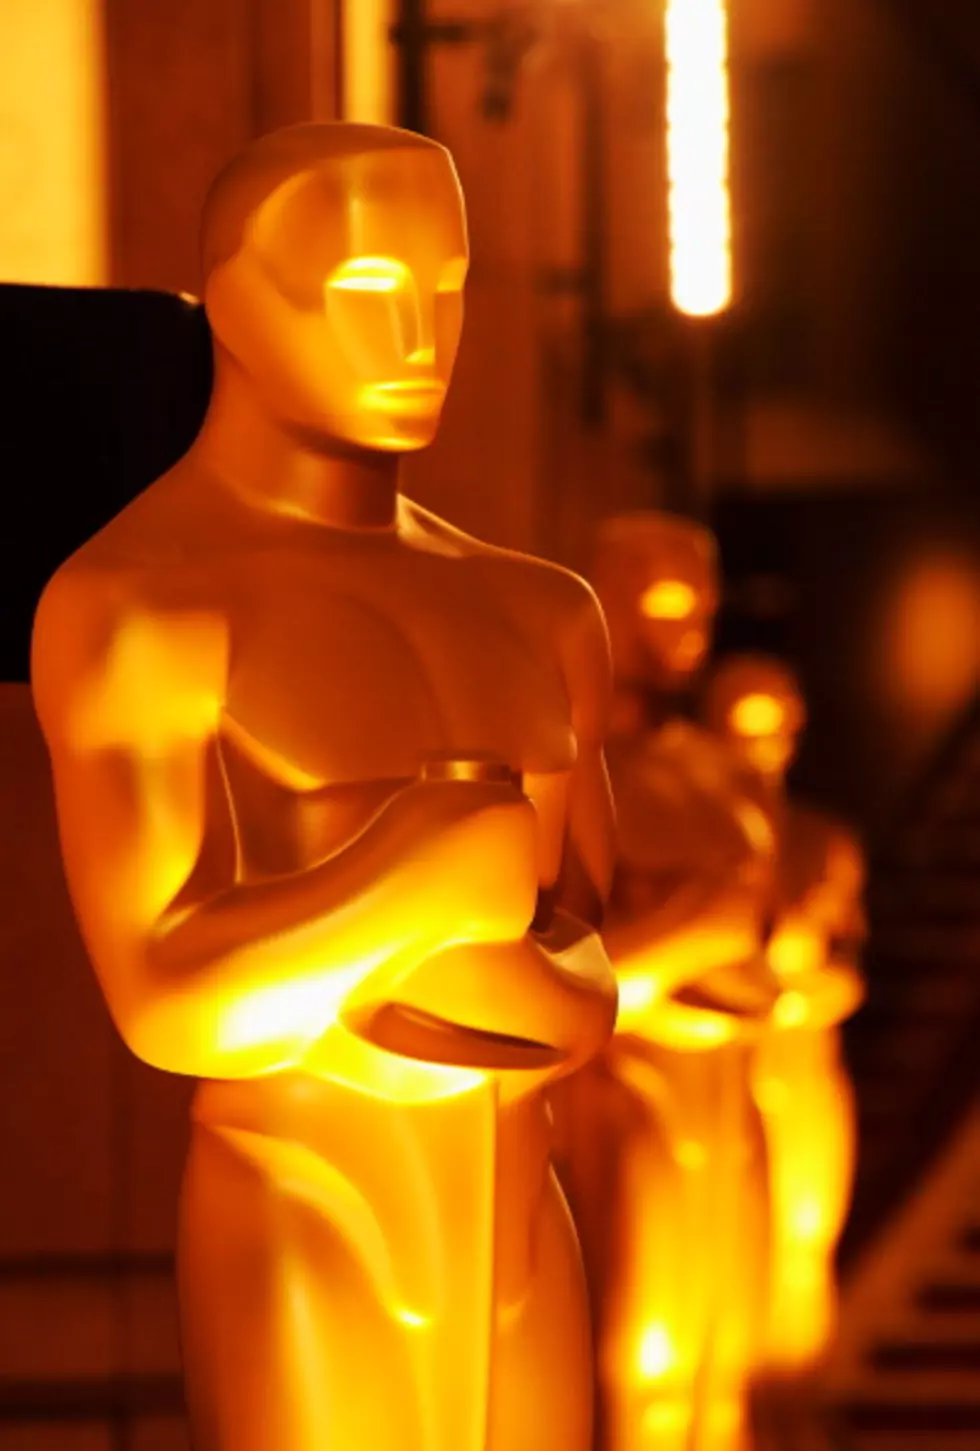 Which Film Should Win the Best Picture Oscar? [POLL]